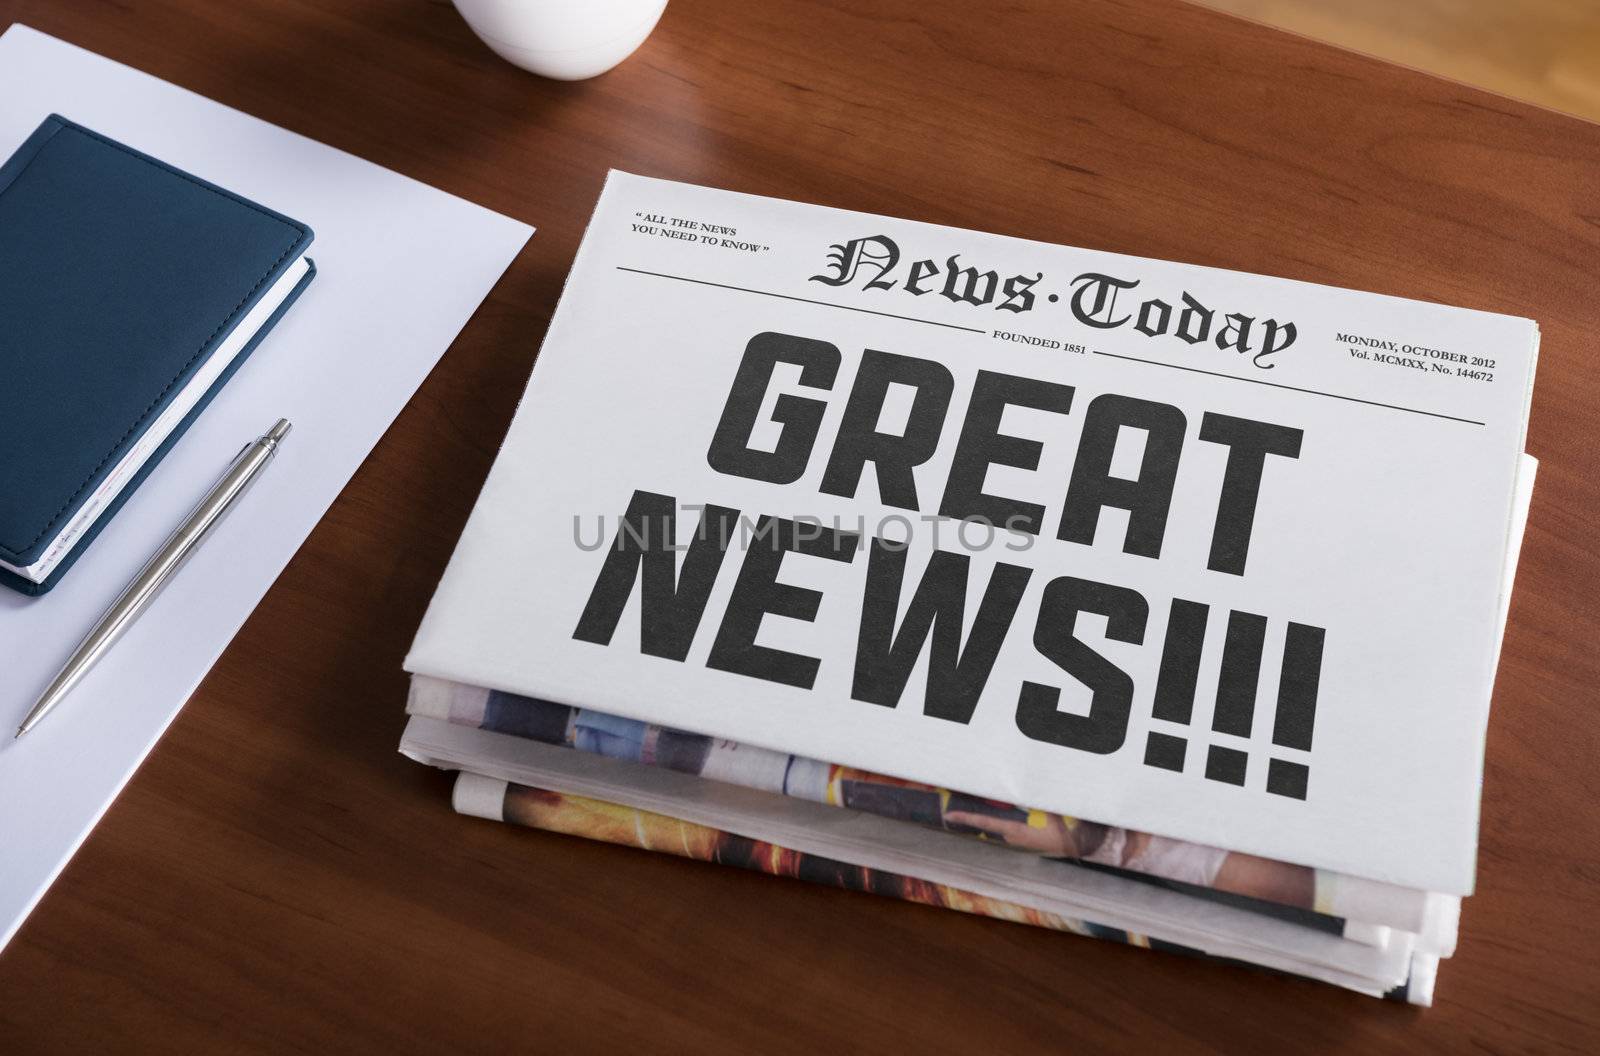 Newspaper with hot topic "Great news" lying on office desk.